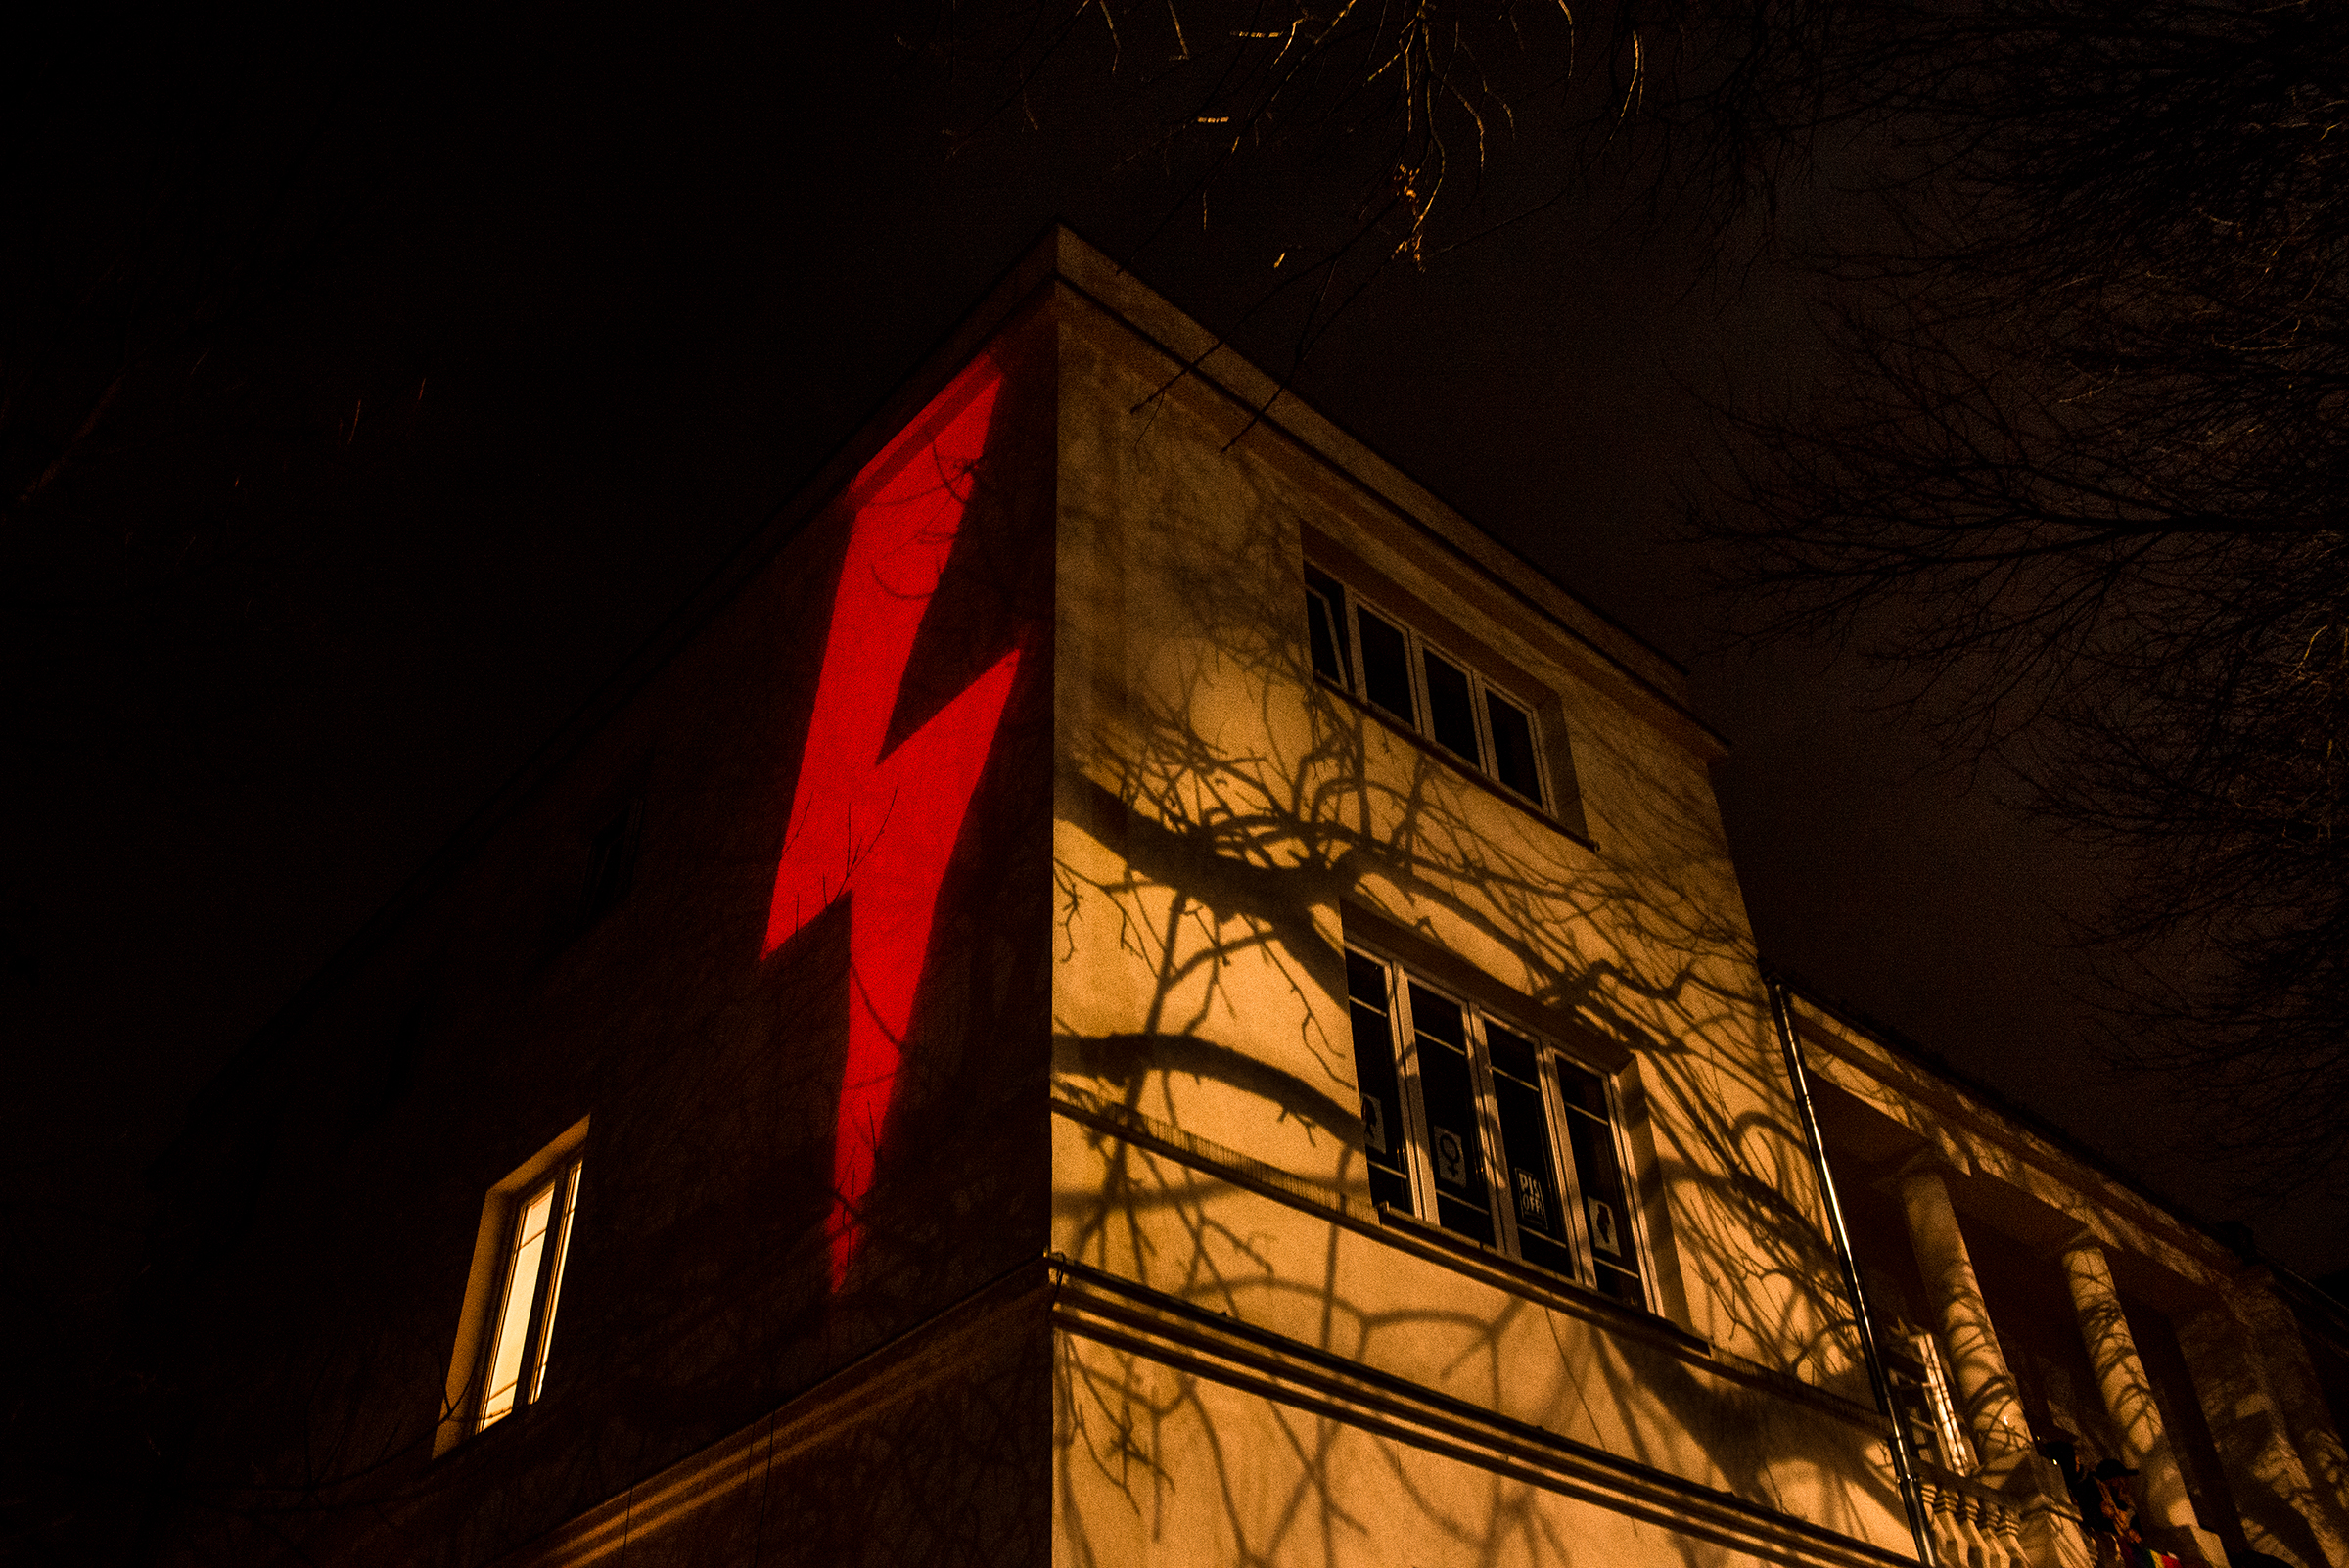 A red lightning bolt, the prominent symbol of recent protests against a Polish court's decision to effectively put a complete ban on abortion, is projected against a building in Warsaw on Oct. 30, 2020. (Kasia Strek)